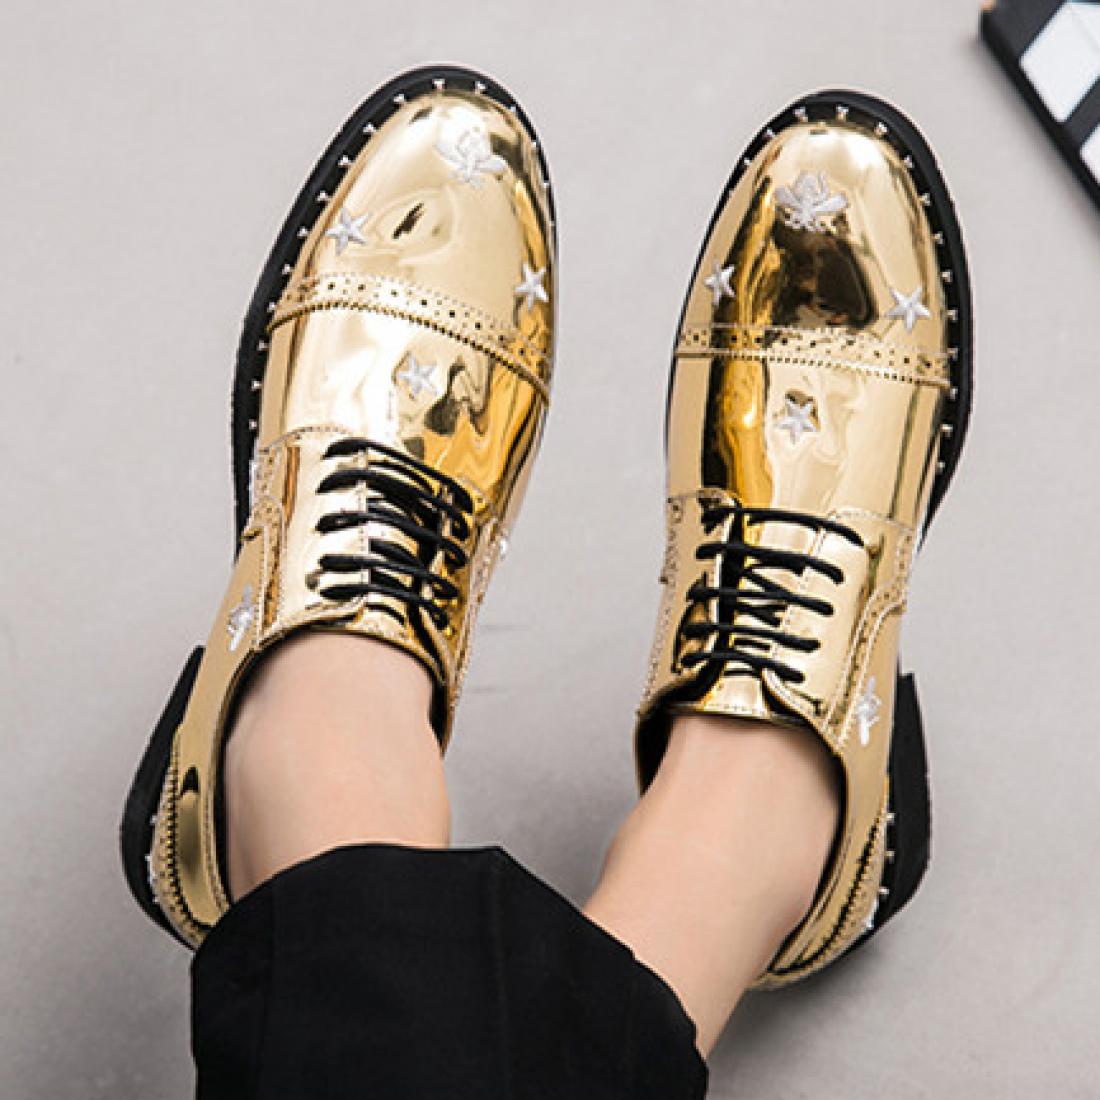 Gold Metallic Bees Embroidery Mens Lace Up Oxfords Dress ...